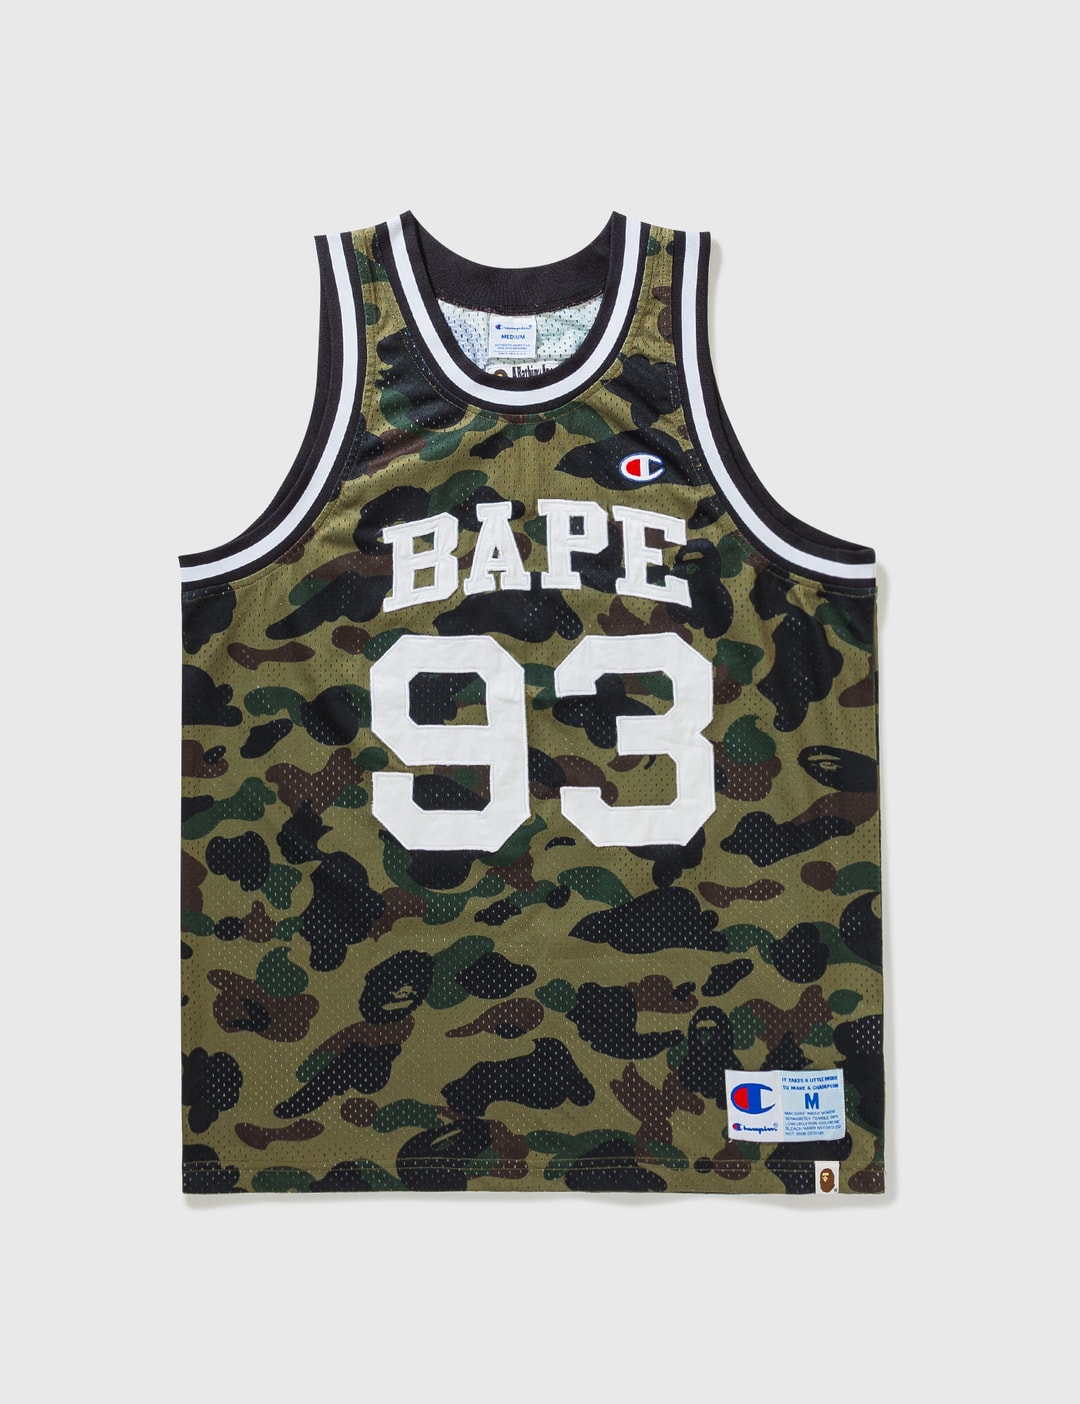 BAPE - Bape X Champion Basketball Jersey  HBX - Globally Curated Fashion  and Lifestyle by Hypebeast